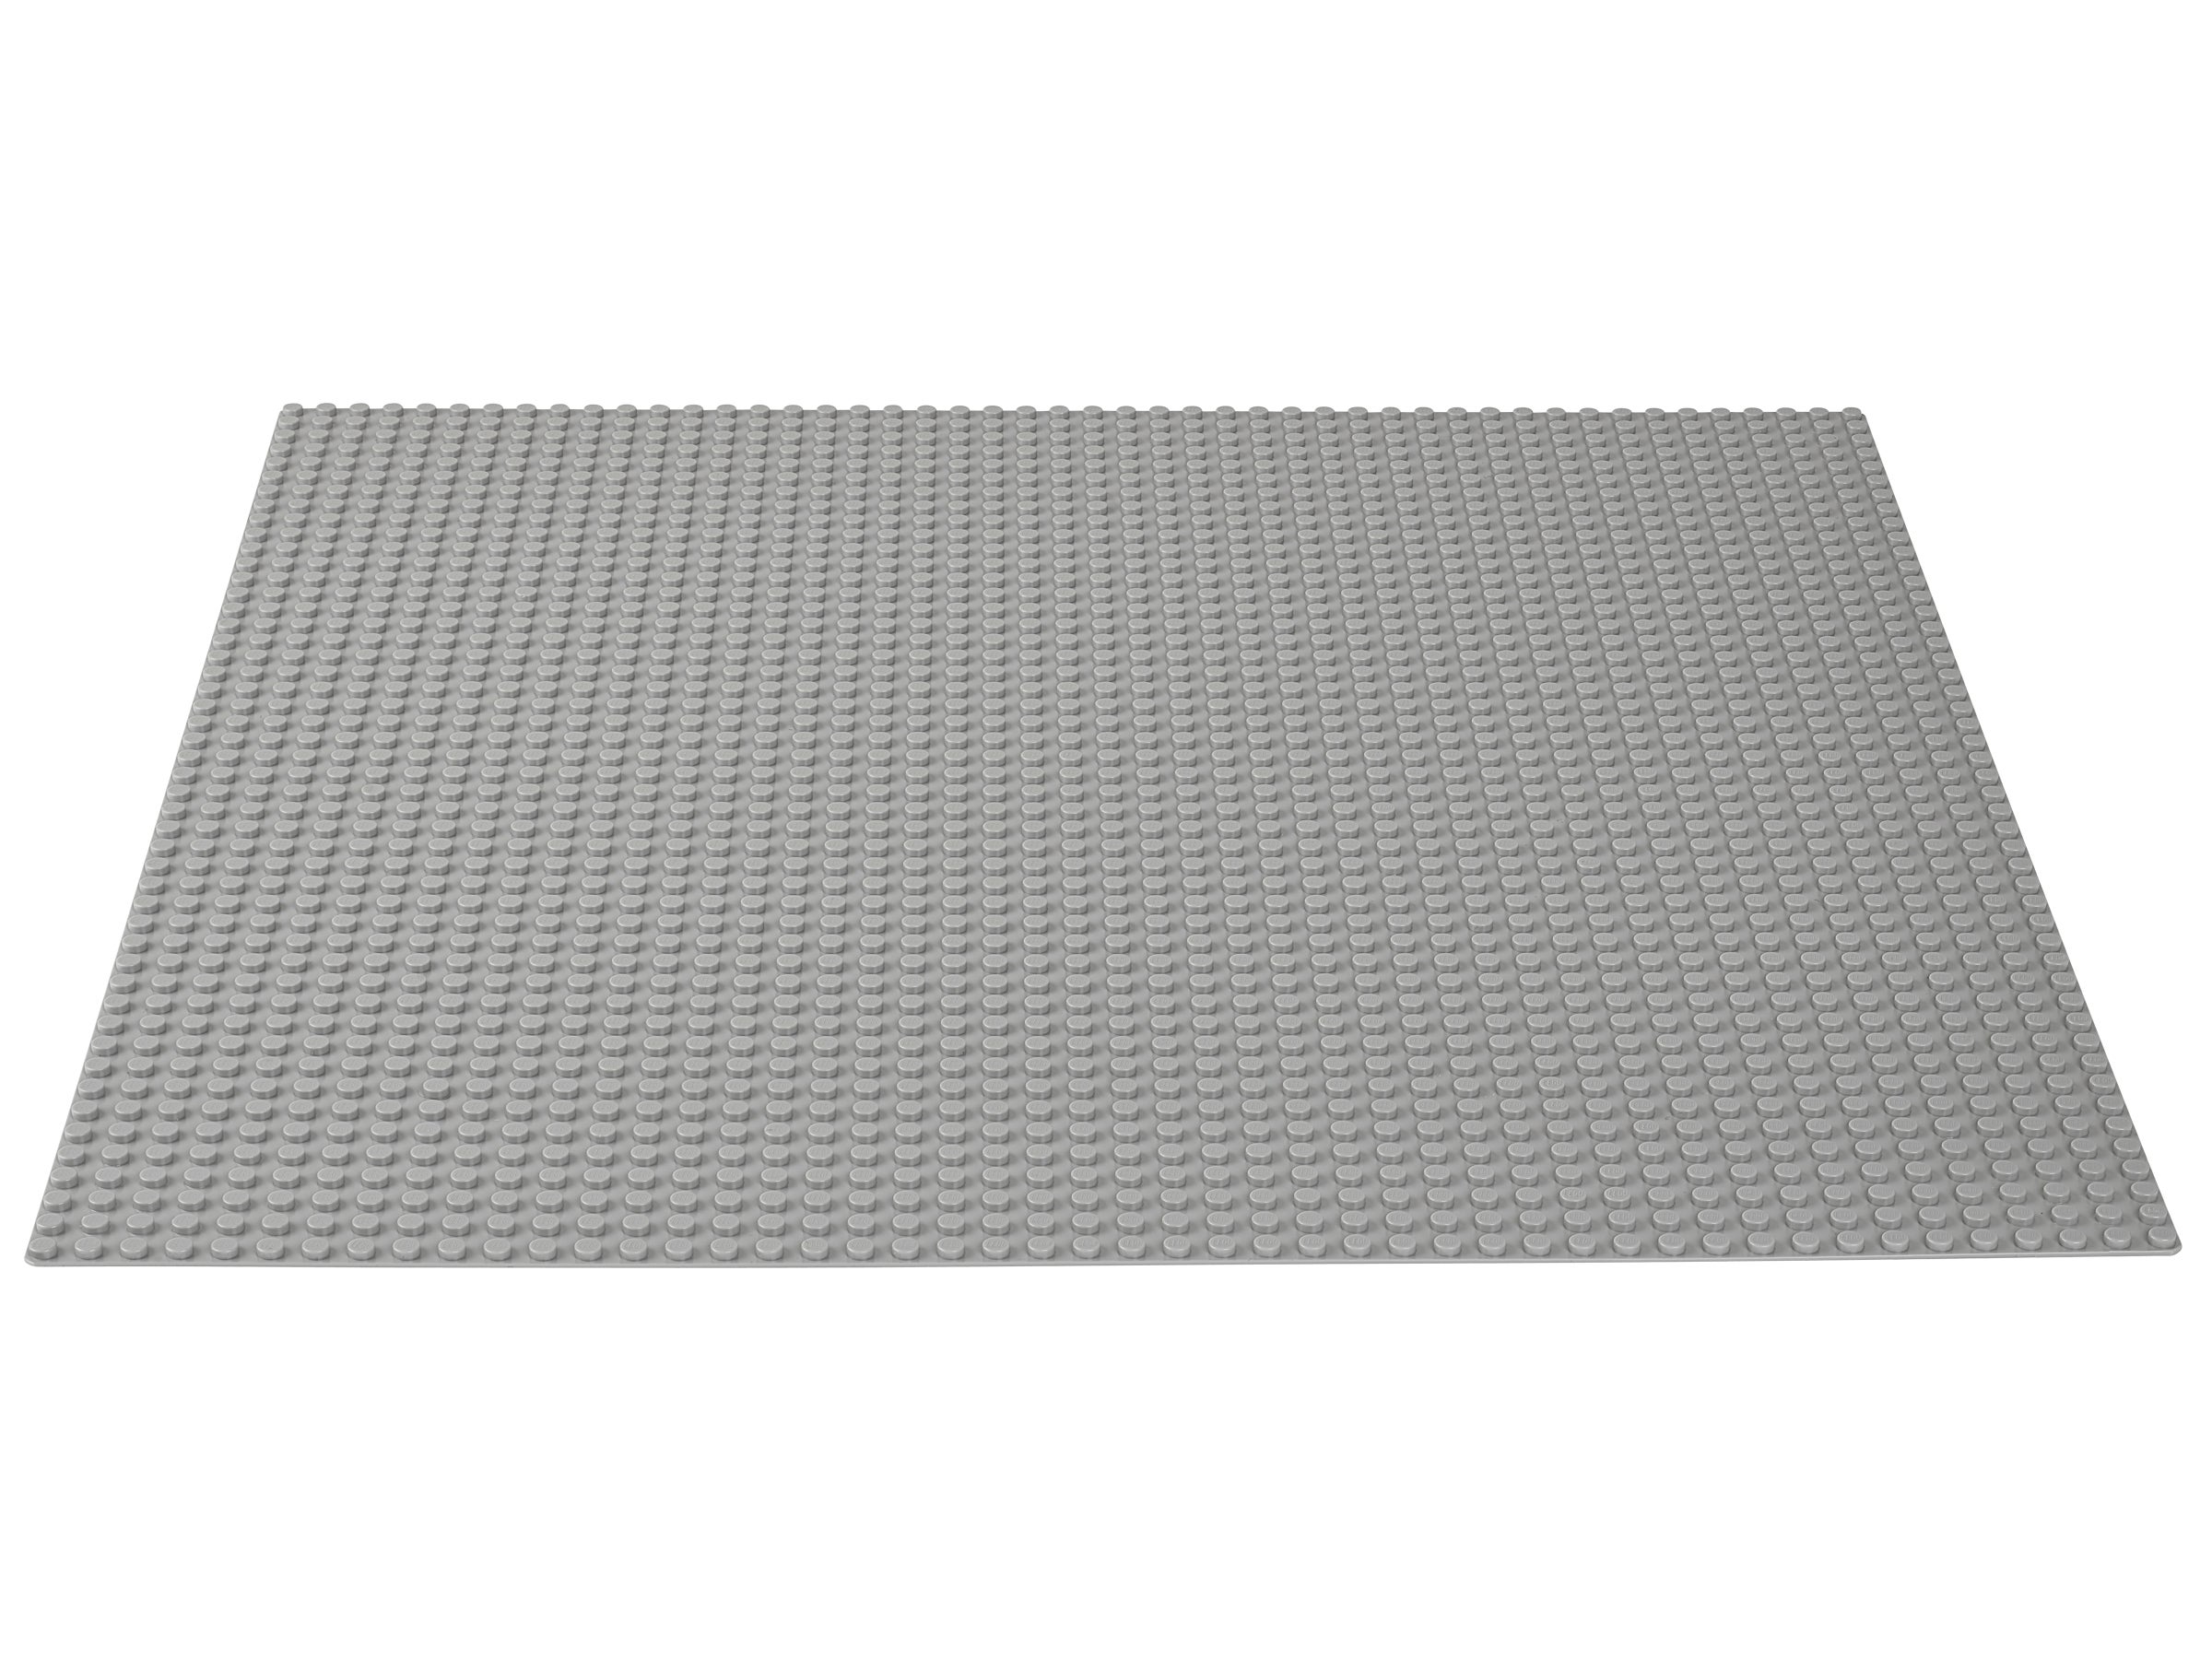 LEGO Classic Gray Baseplate 10701 Building Toy compatible with Building Bricks 1